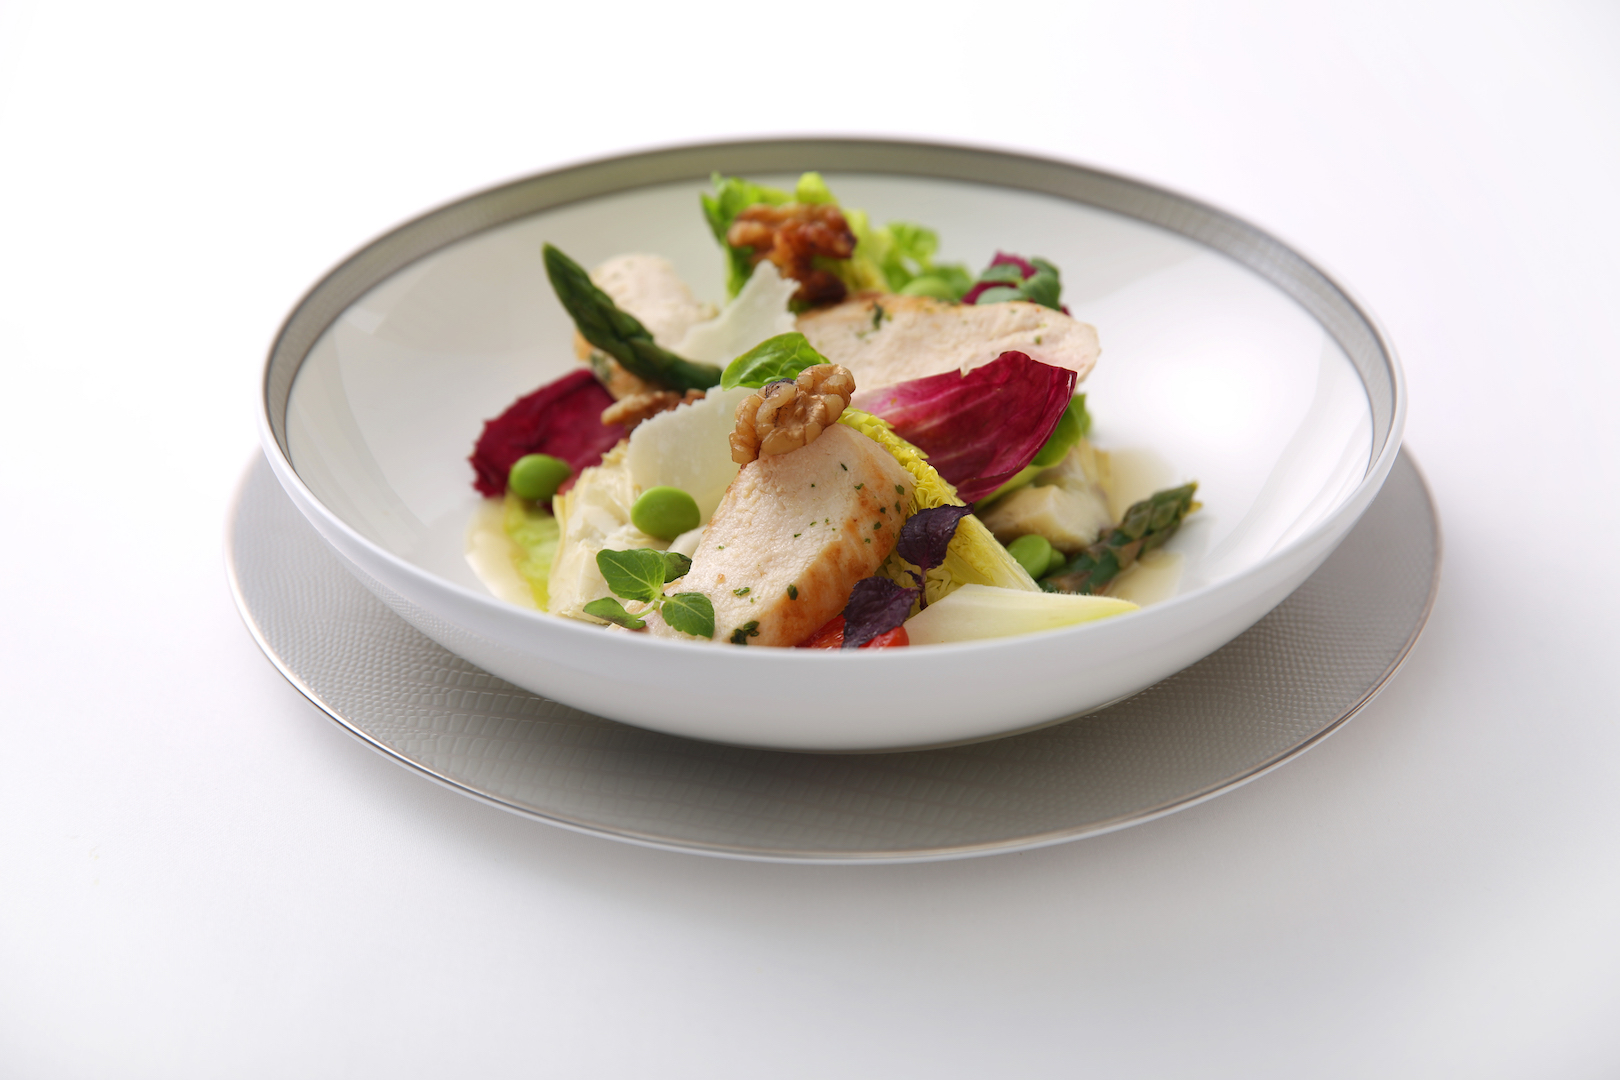 Gourmet Skies: Singapore Airlinesâ€™ Fine Dining Services